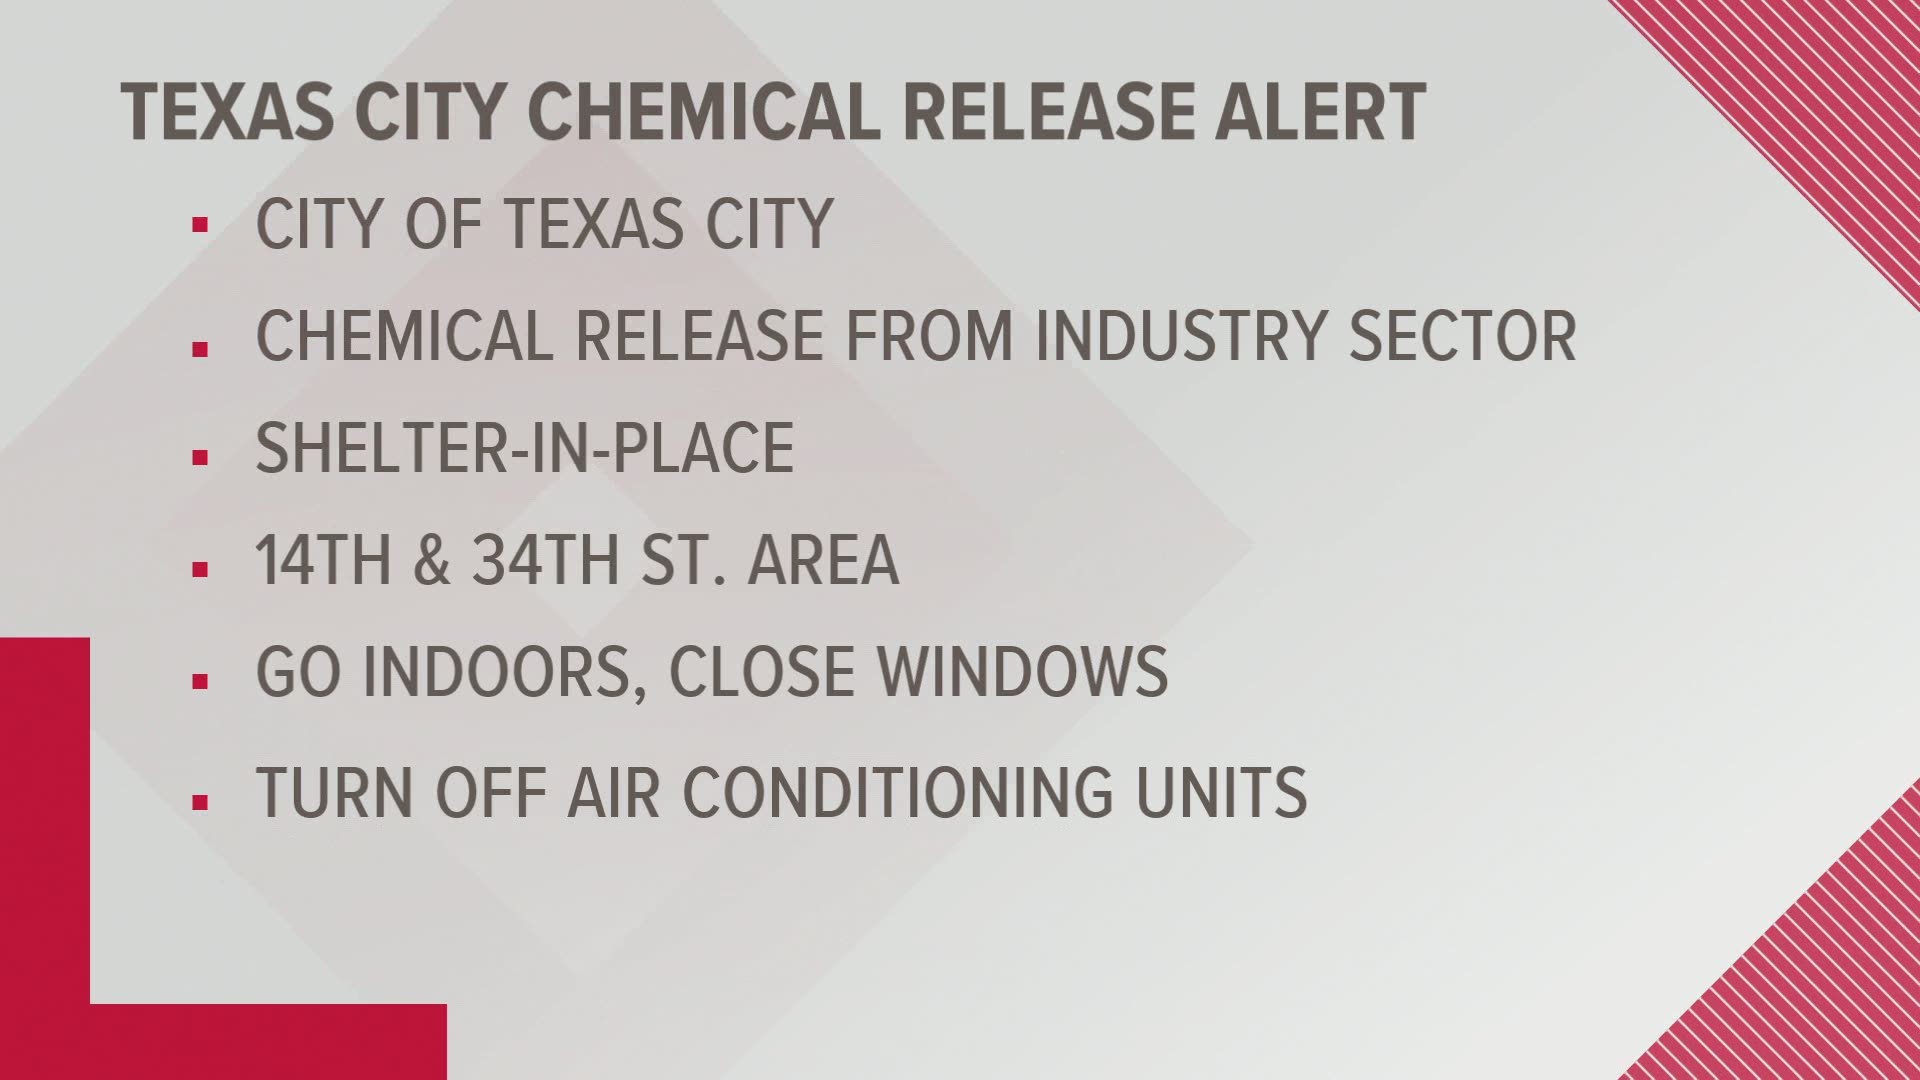 Texas City has issued a shelter-in-place due to a chemical release from an industry sector.